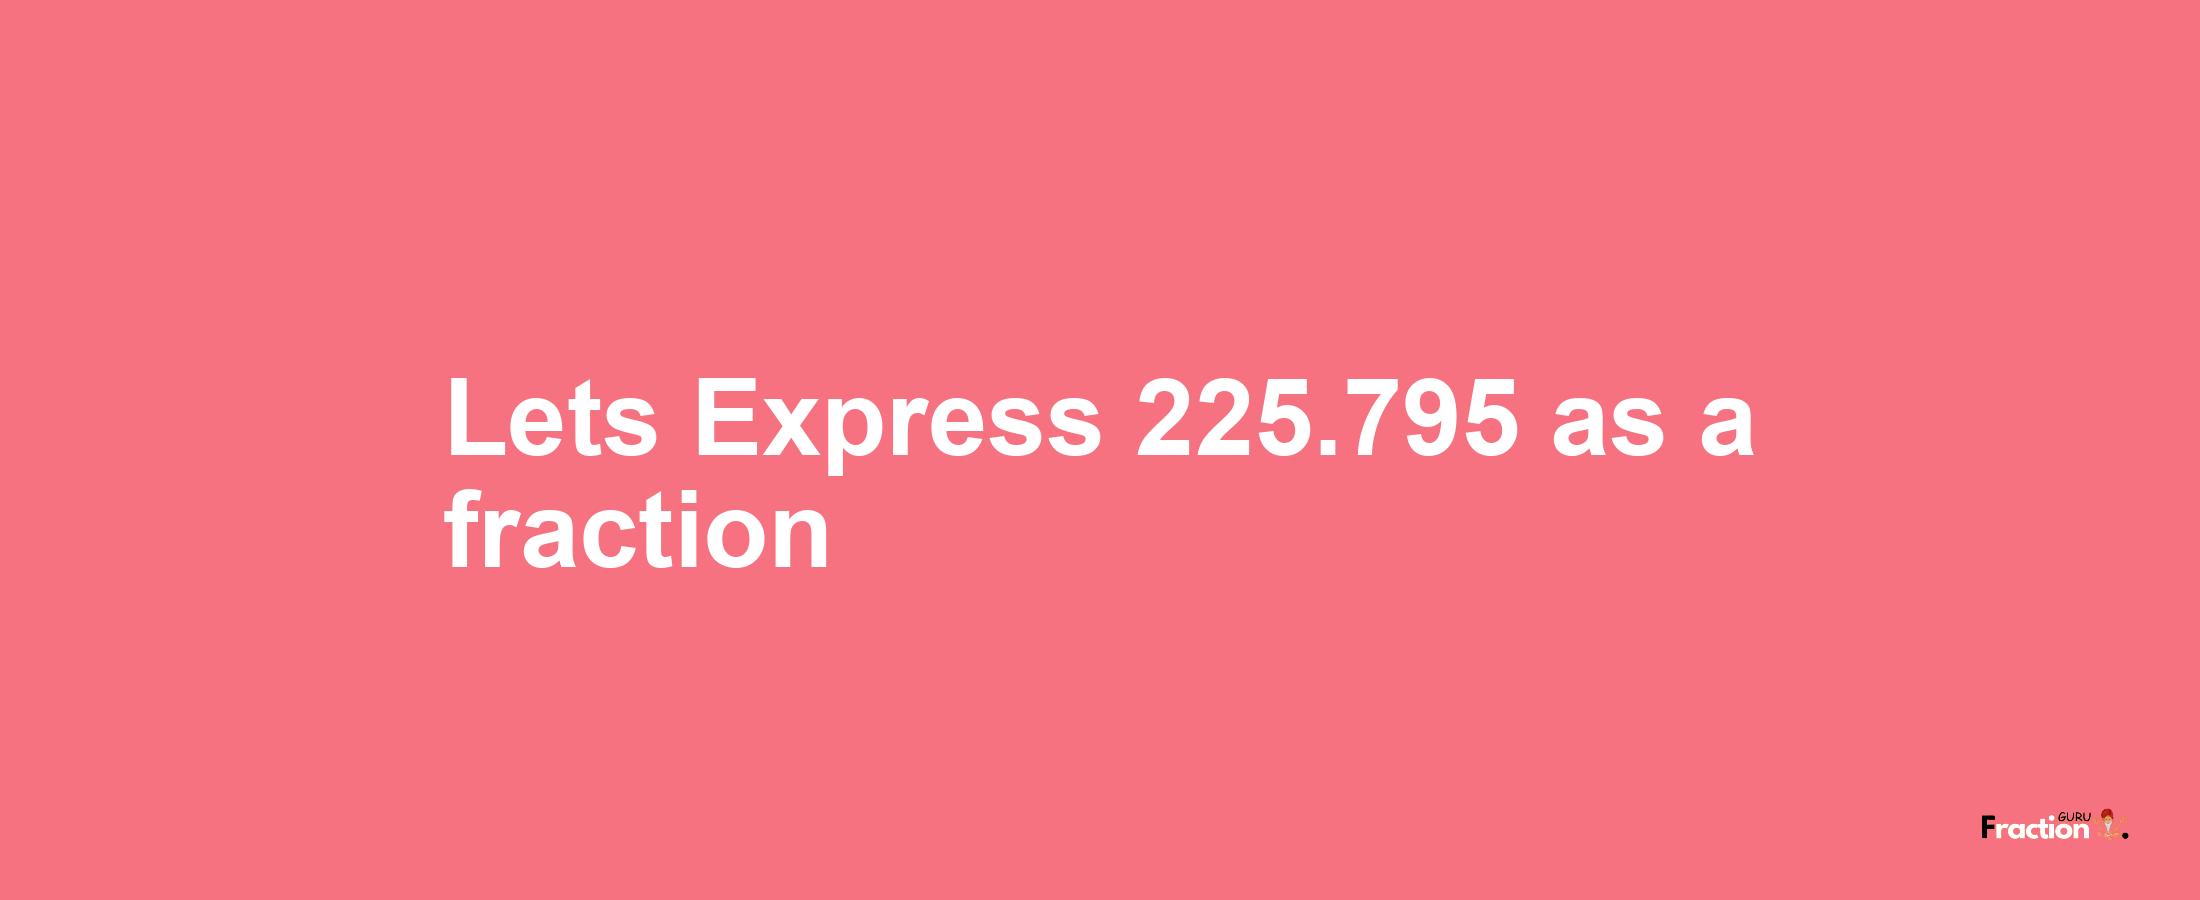 Lets Express 225.795 as afraction